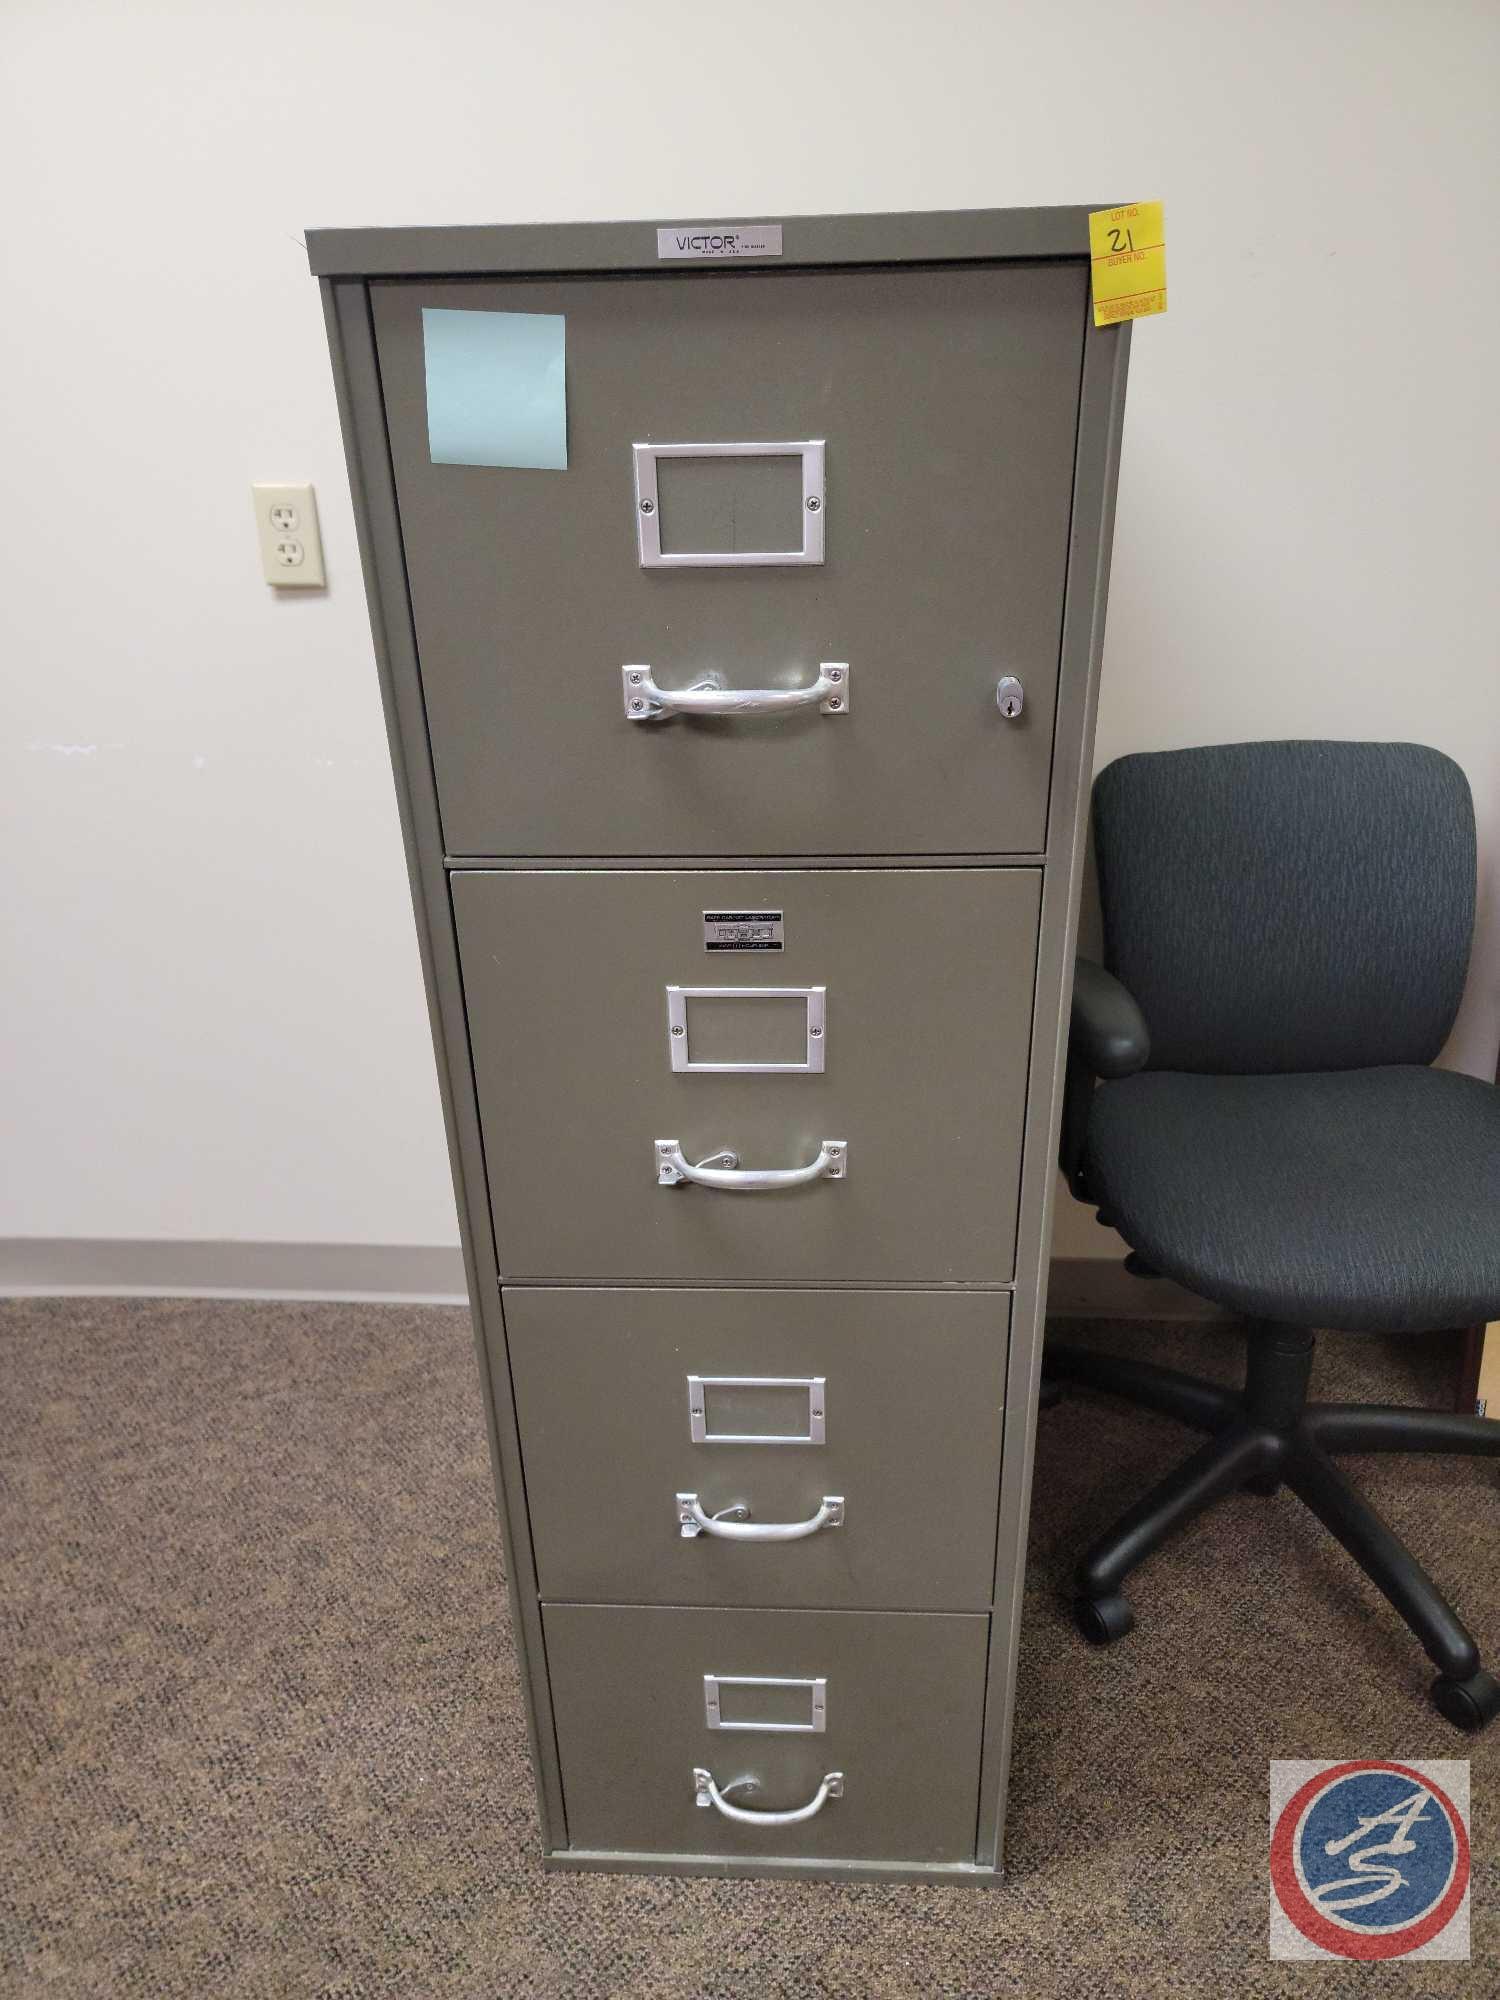 (2) 4 drawer metal file cabinets, 4 stacks of large binders, 2 cork boards, 3 HP printers and cloth